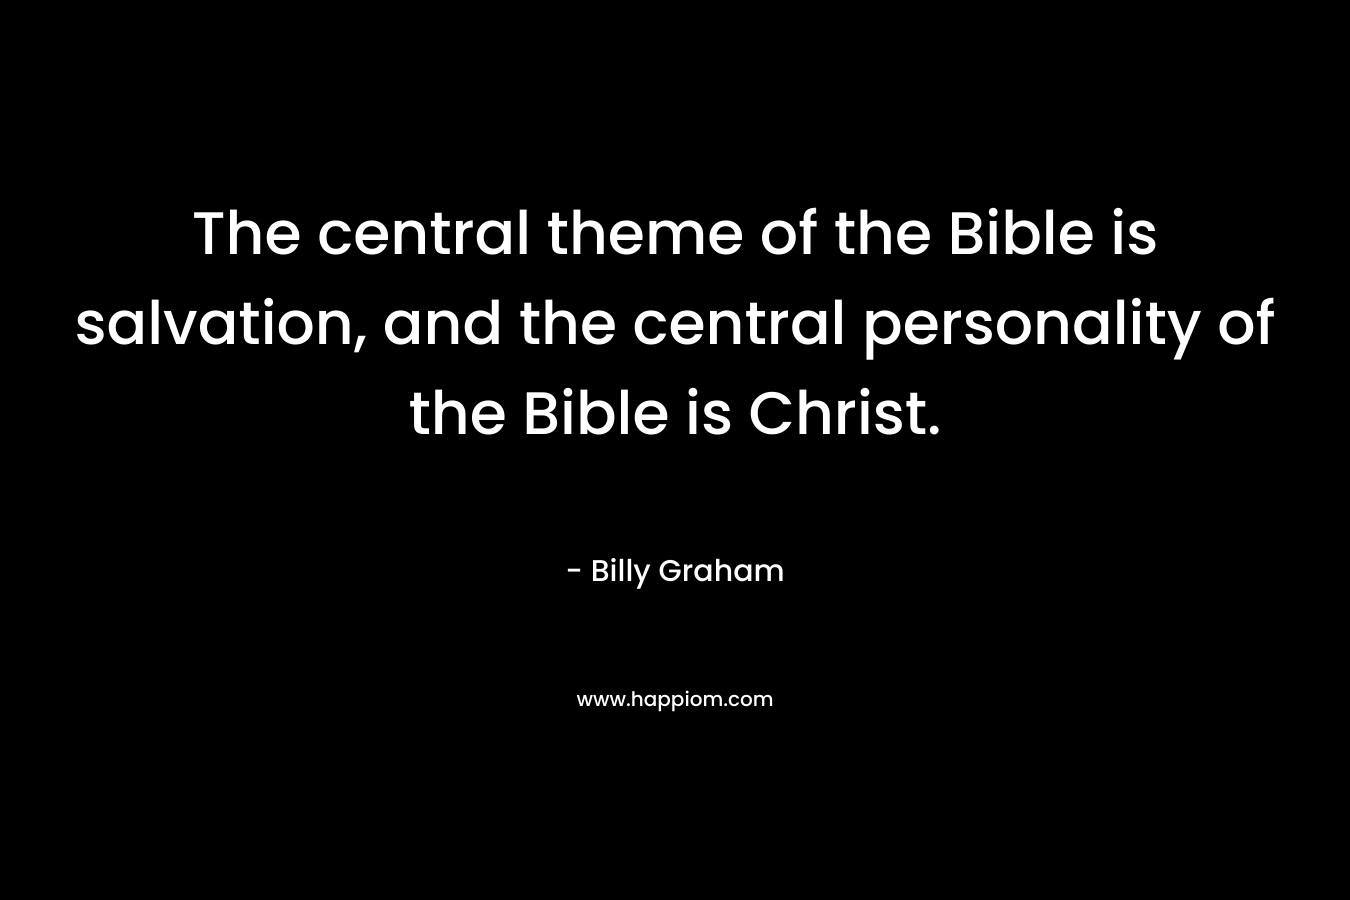 The central theme of the Bible is salvation, and the central personality of the Bible is Christ.